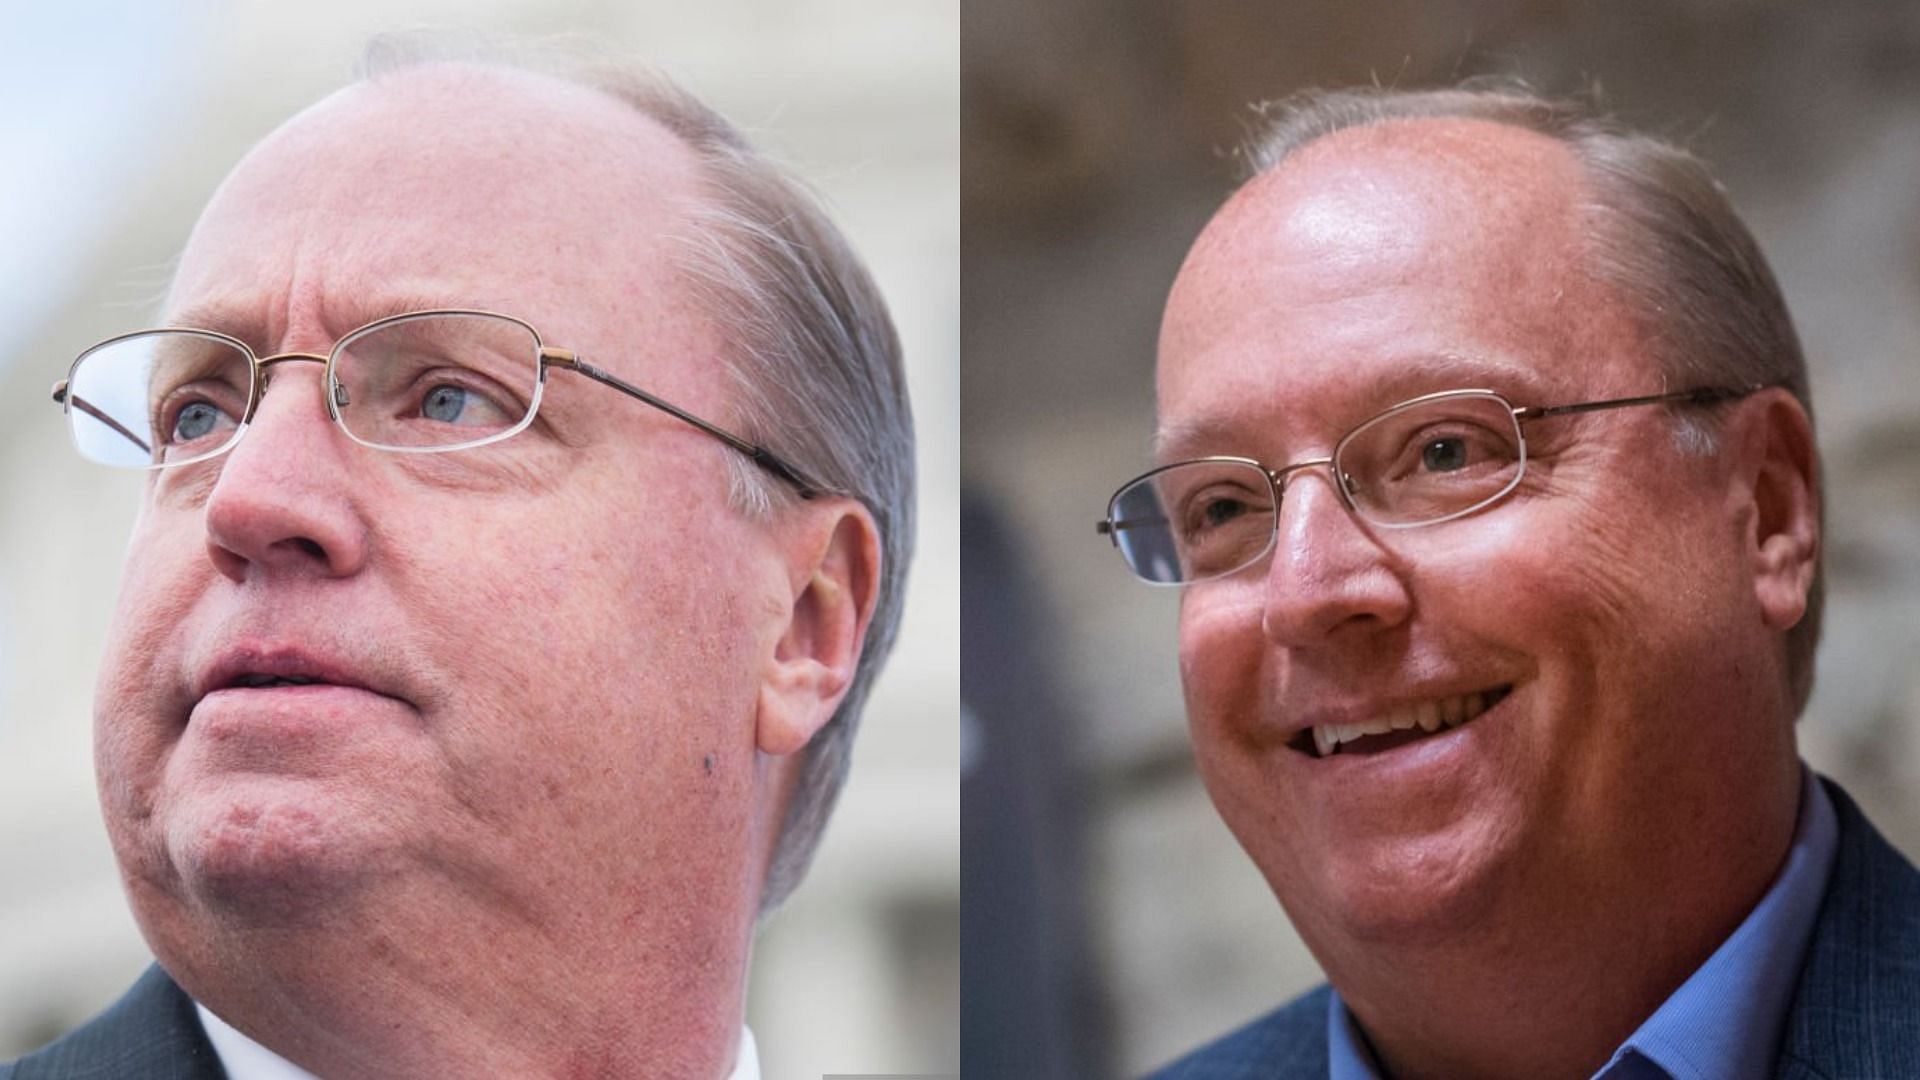 Minnesota Congressman Jim Hagedorn passed away after a battle with kidney cancer at the age of 59 (Image via Tom Williams/Getty Images)